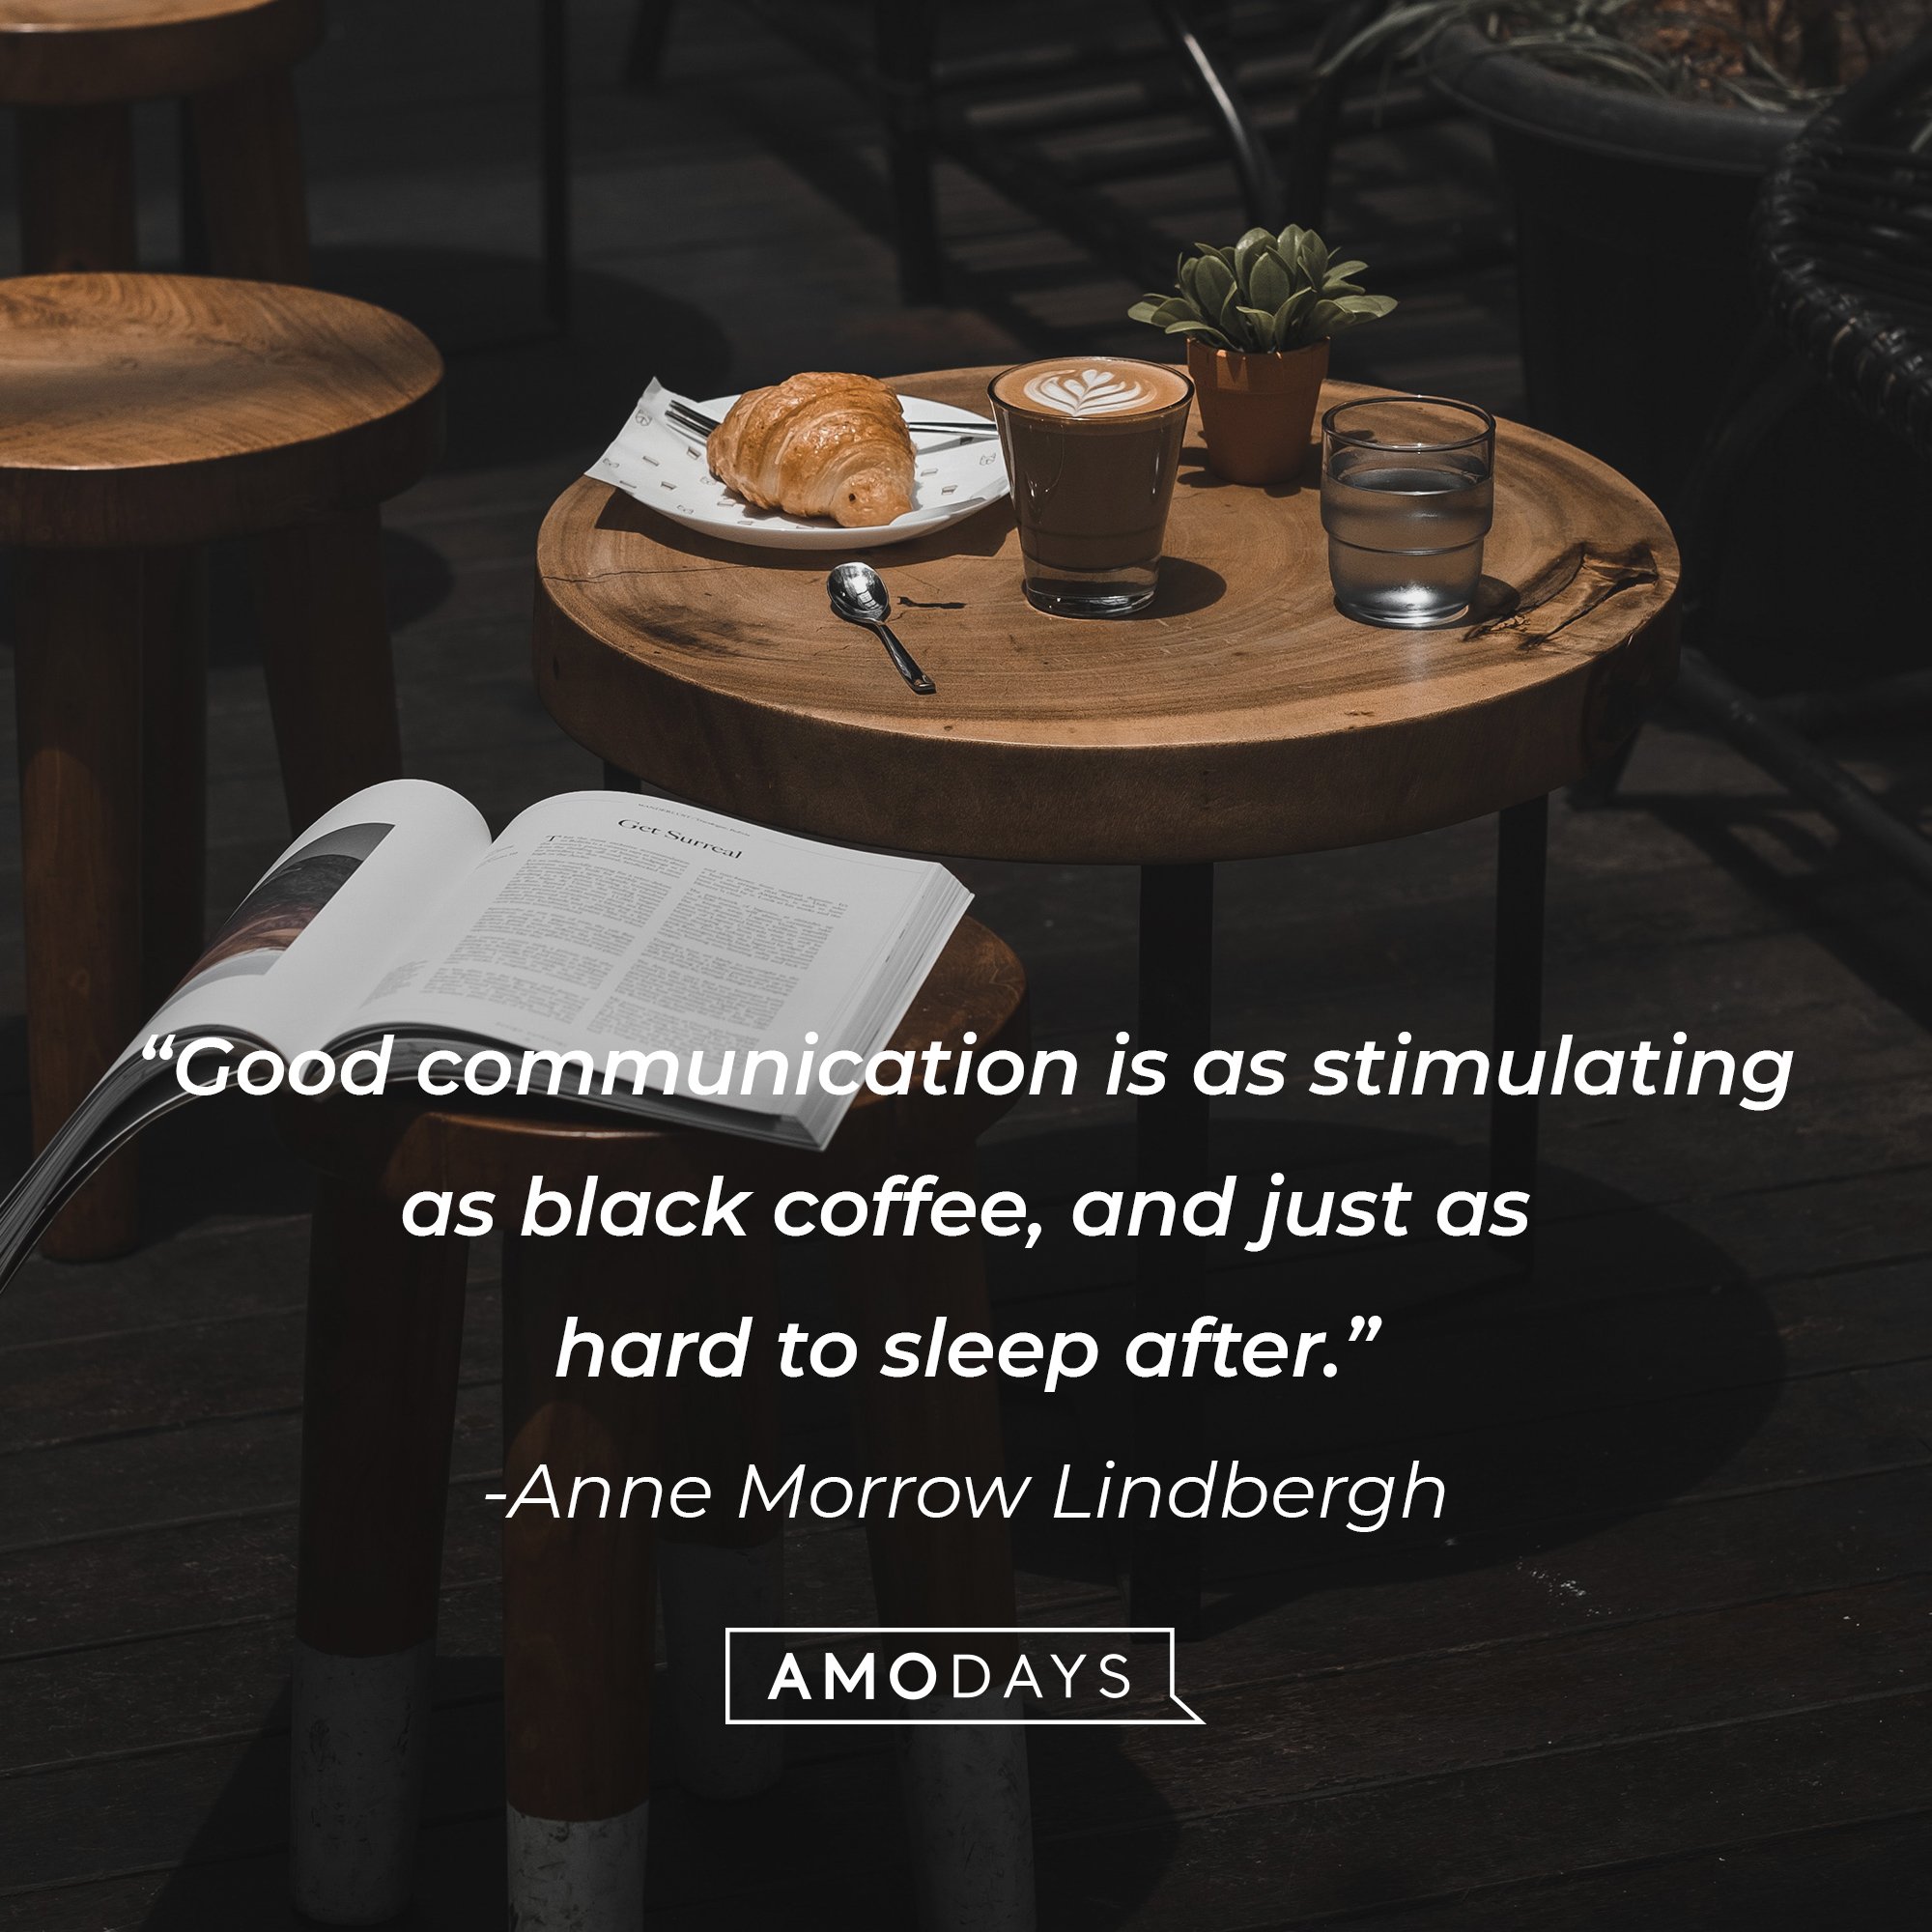 Anne Morrow Lindbergh's quote: "Good communication is as stimulating as black coffee, and just as hard to sleep after." | Image: AmoDays